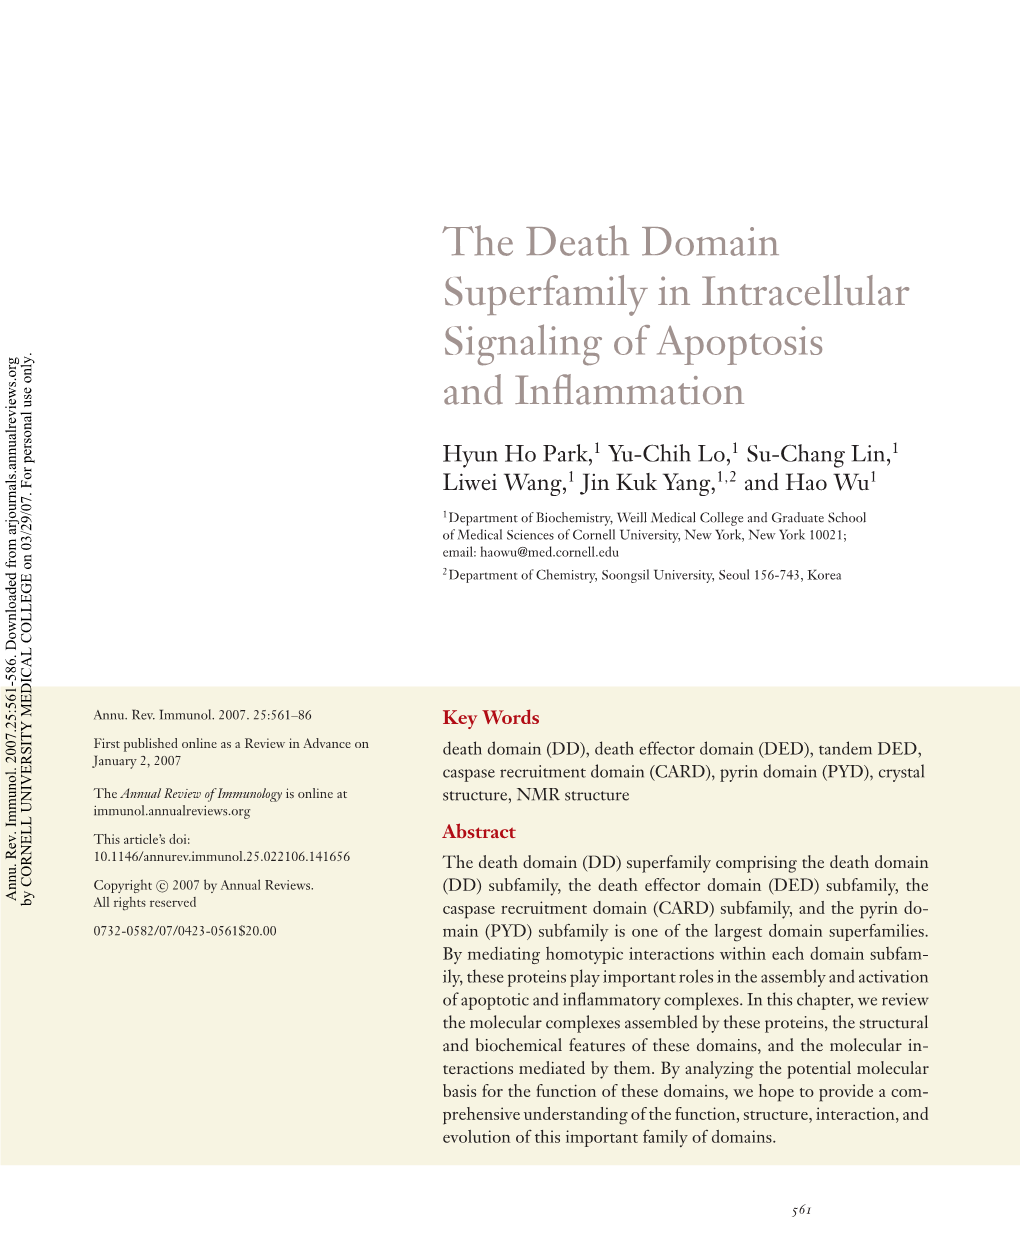 The Death Domain Superfamily in Intracellular Signaling of Apoptosis and Inﬂammation